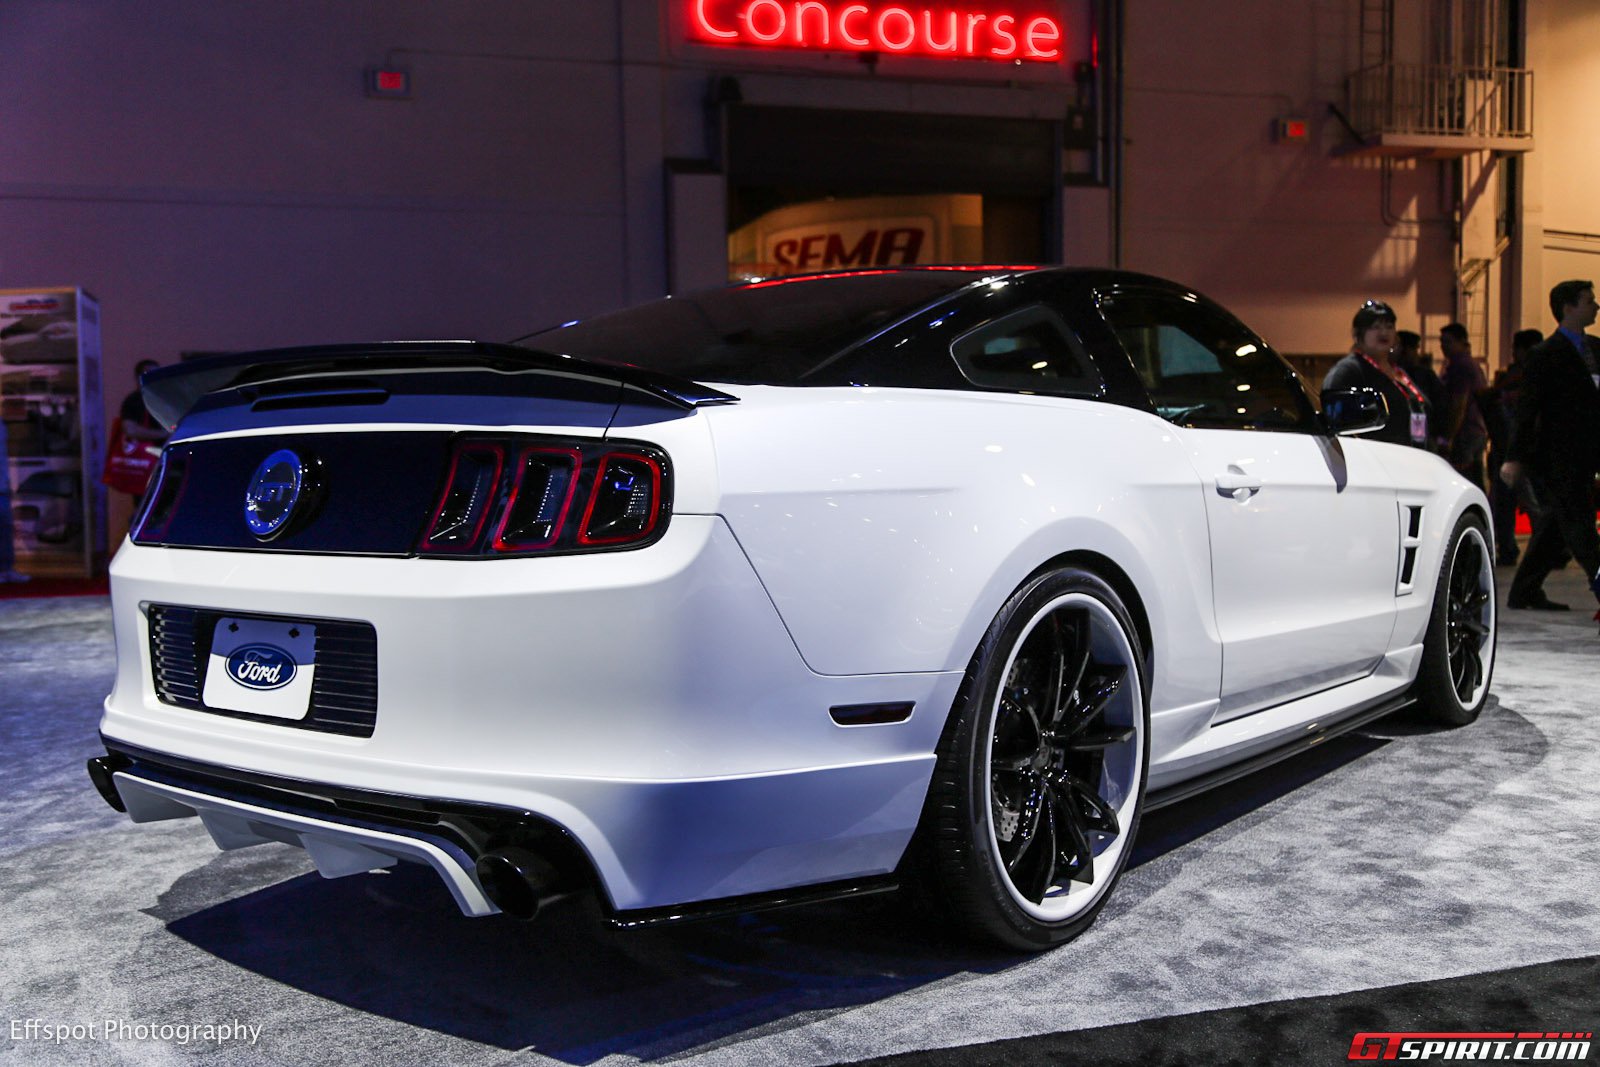 http://www.gtspirit.com/wp-content/gallery/sema-2012-ford-mustang-gt-dso-eyeware-edition/p54a5480.jpg